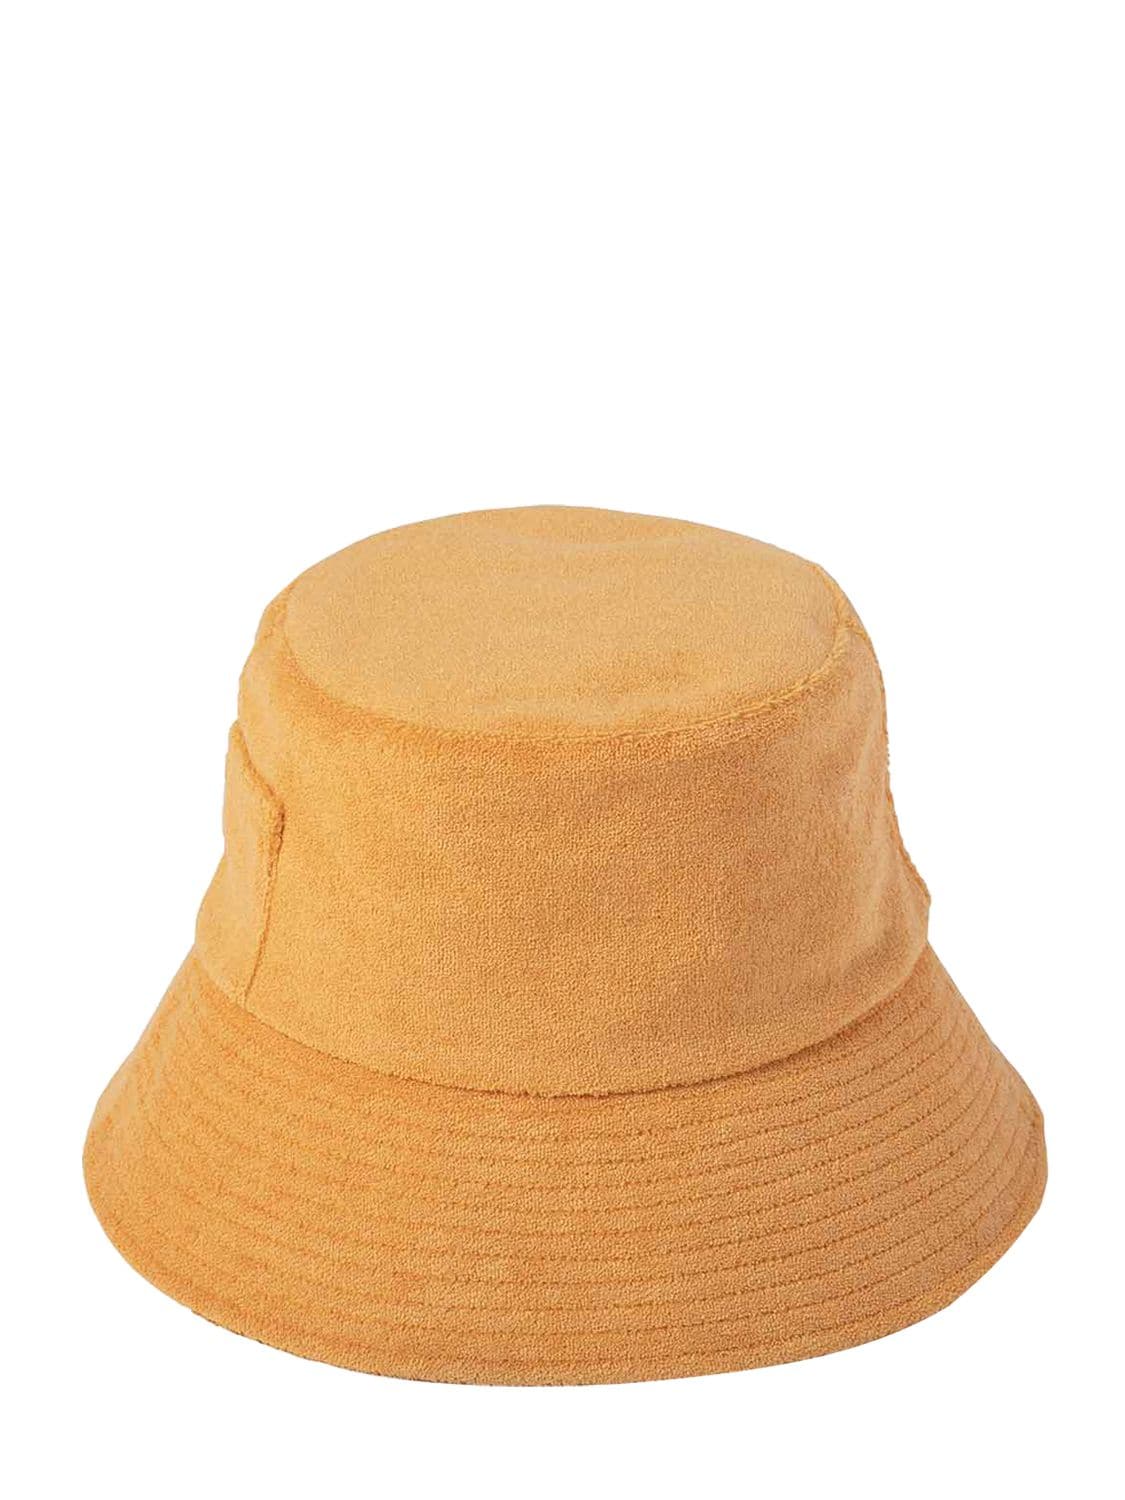 LACK OF COLOR WAVE BUCKET TERRY COTTON CLOTH HAT,74IJ5A011-VEFOR0VSSU5F0